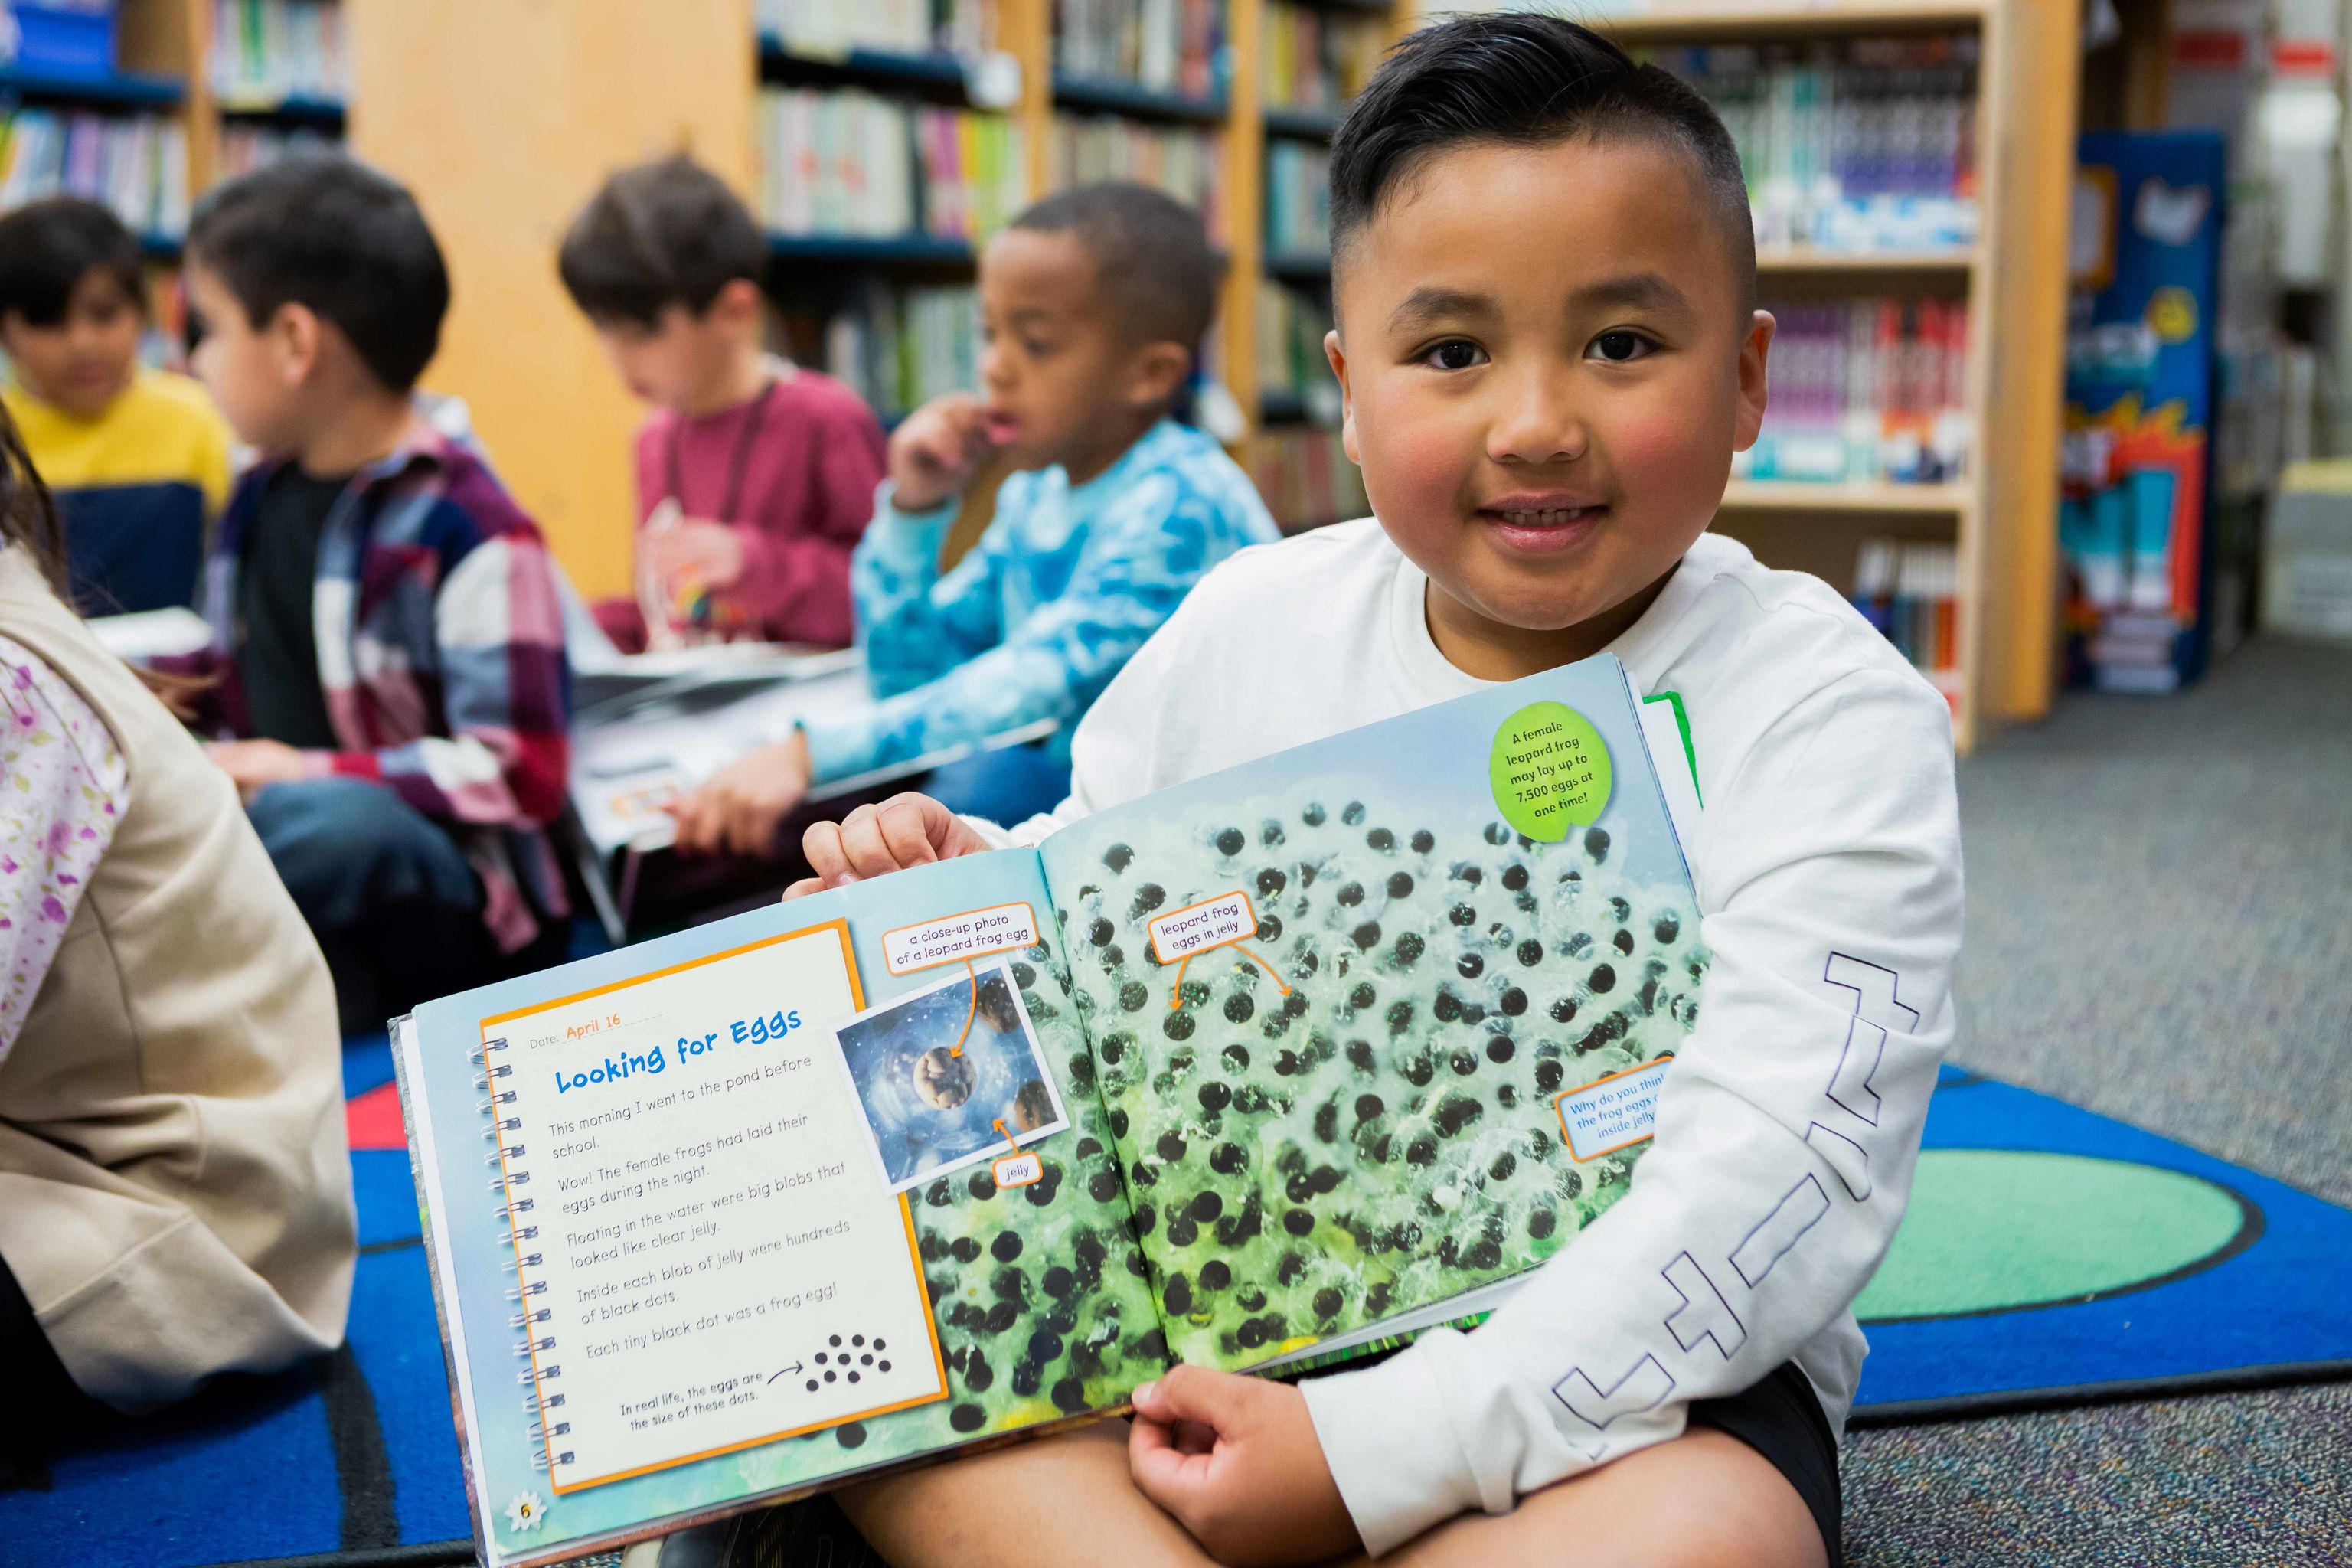 A young boy displays a book he is reading.